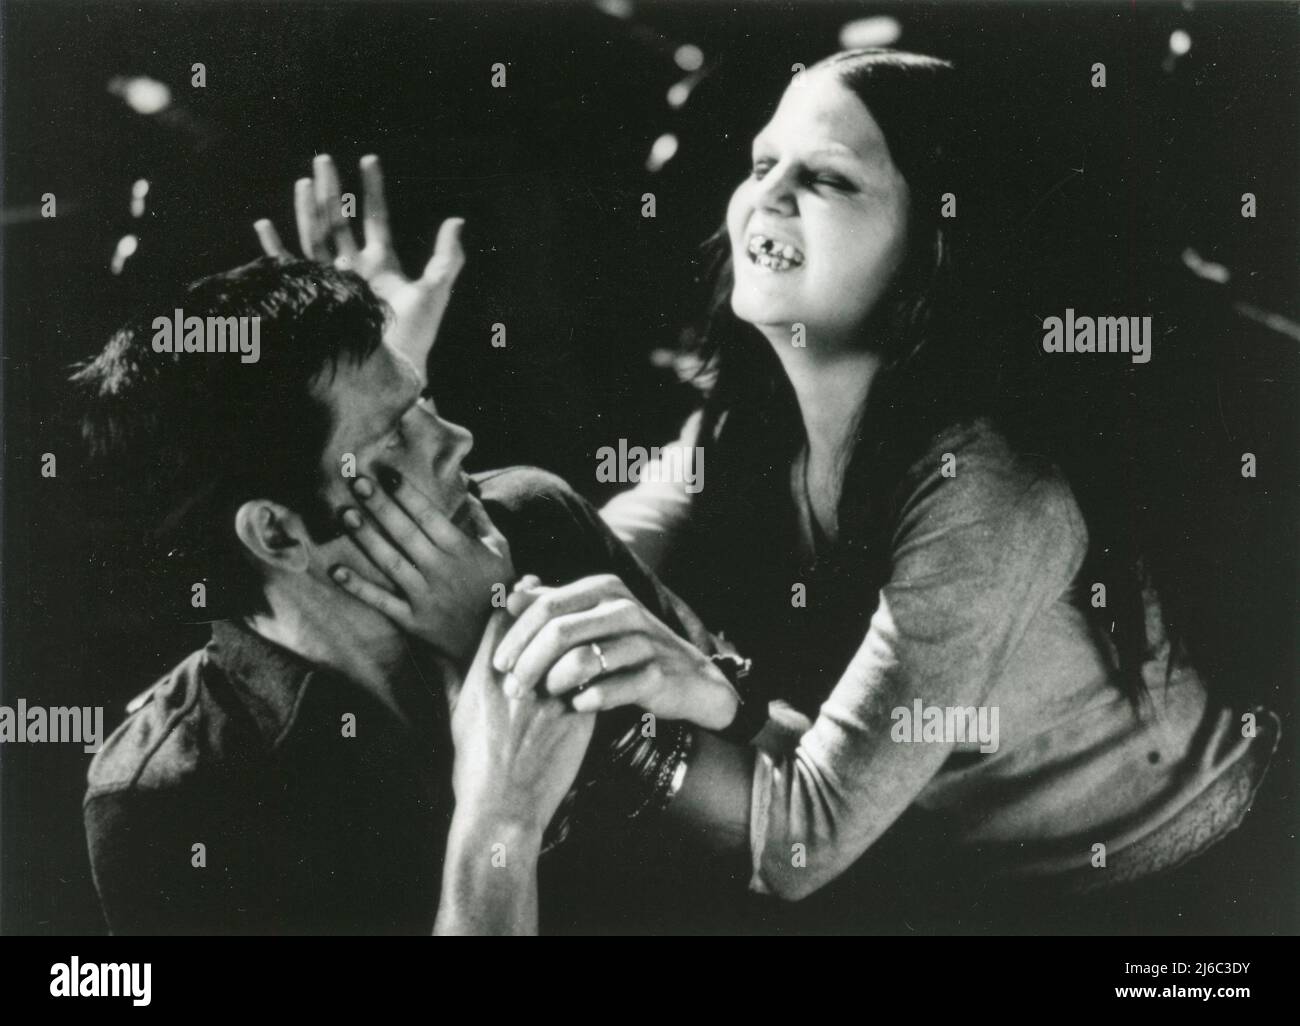 American actor Kevin Bacon and actress Jennifer Morrison in the movie Stir of Echoes, USA 1999 Stock Photo